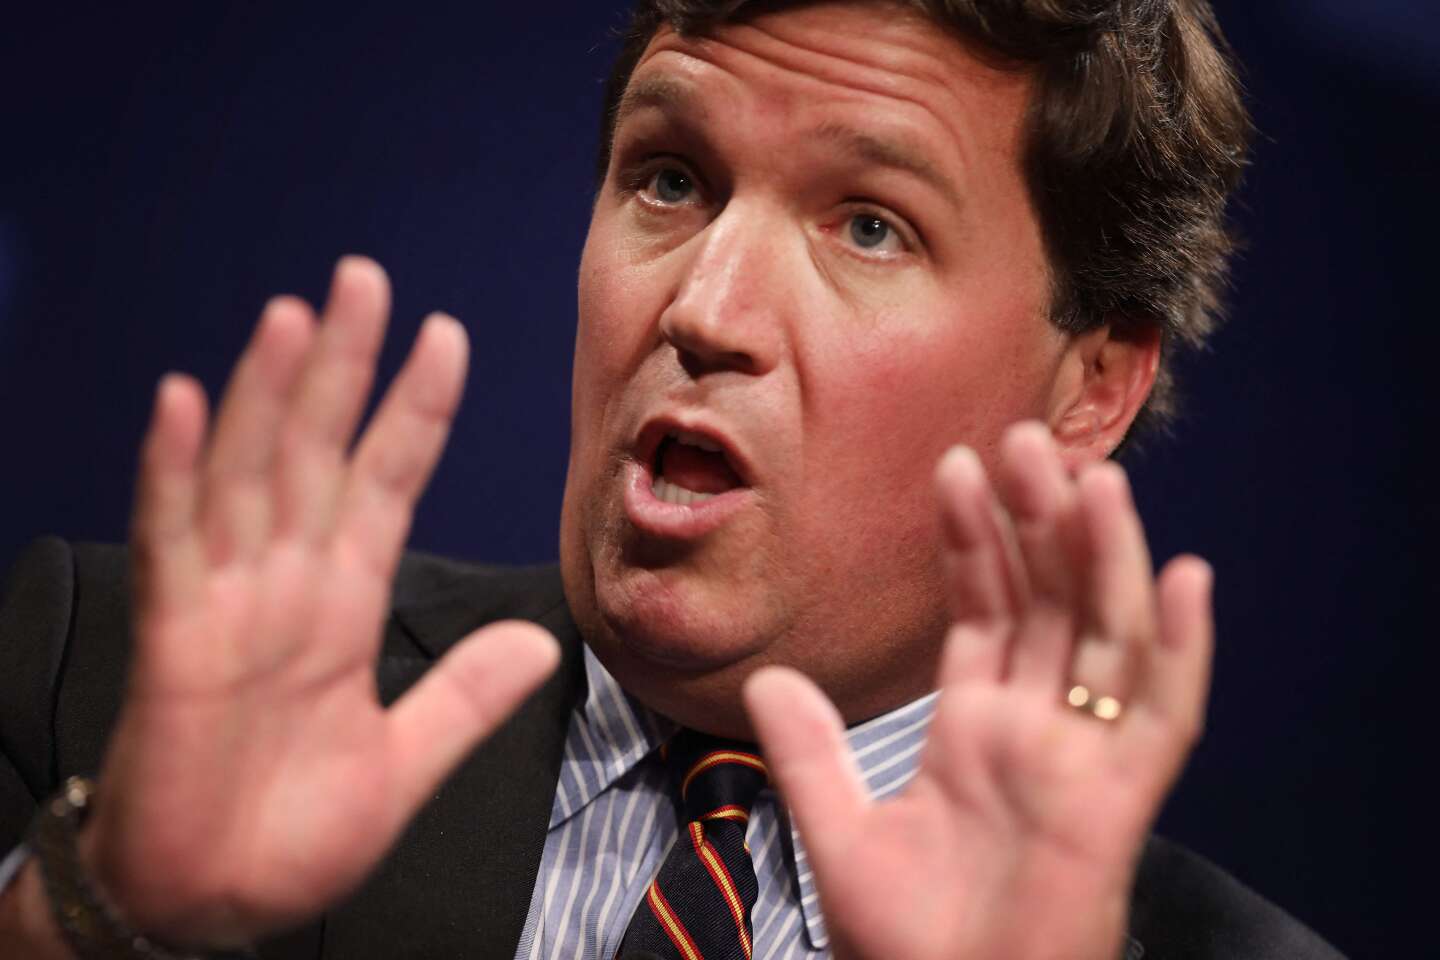 Tucker Carlson, the star Fox News anchor, was abruptly fired after six years of invigorating American political discourse.